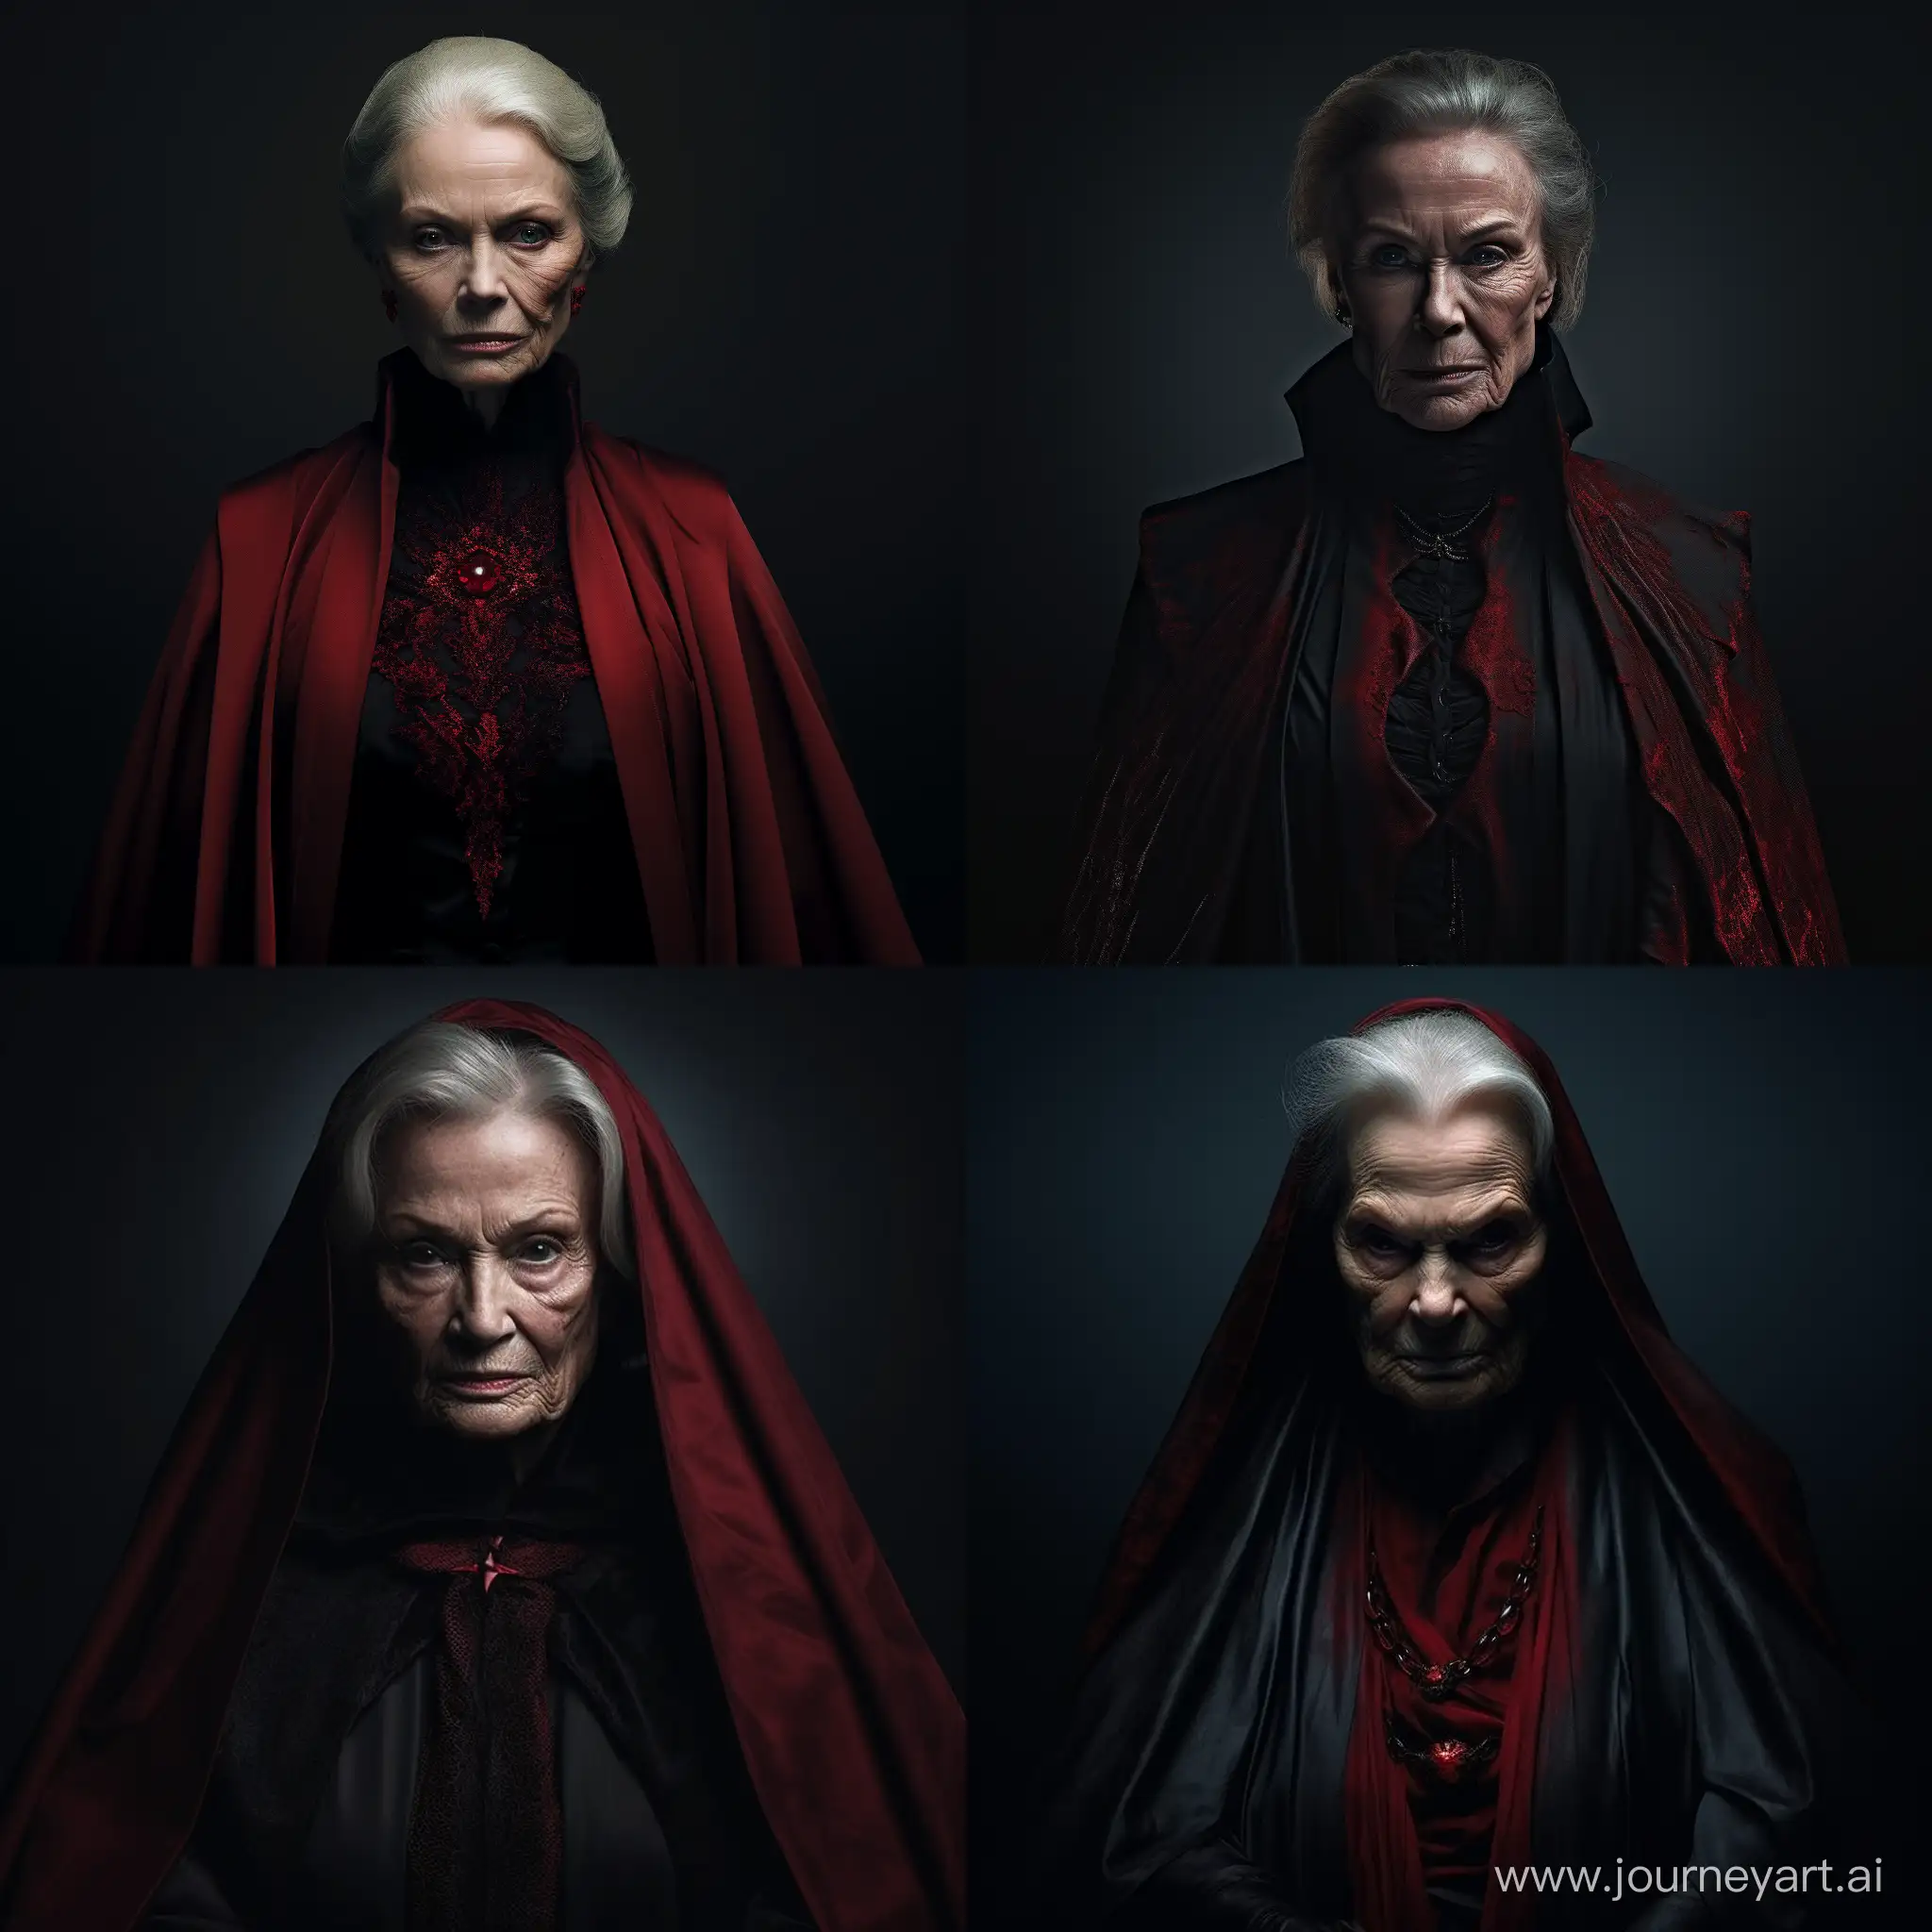 Sith elegant older woman, portrait, Sith, dark red cloak, darkness, scar on face, fashion photography, strong contrast lighting, cinematic, arrogant, angry